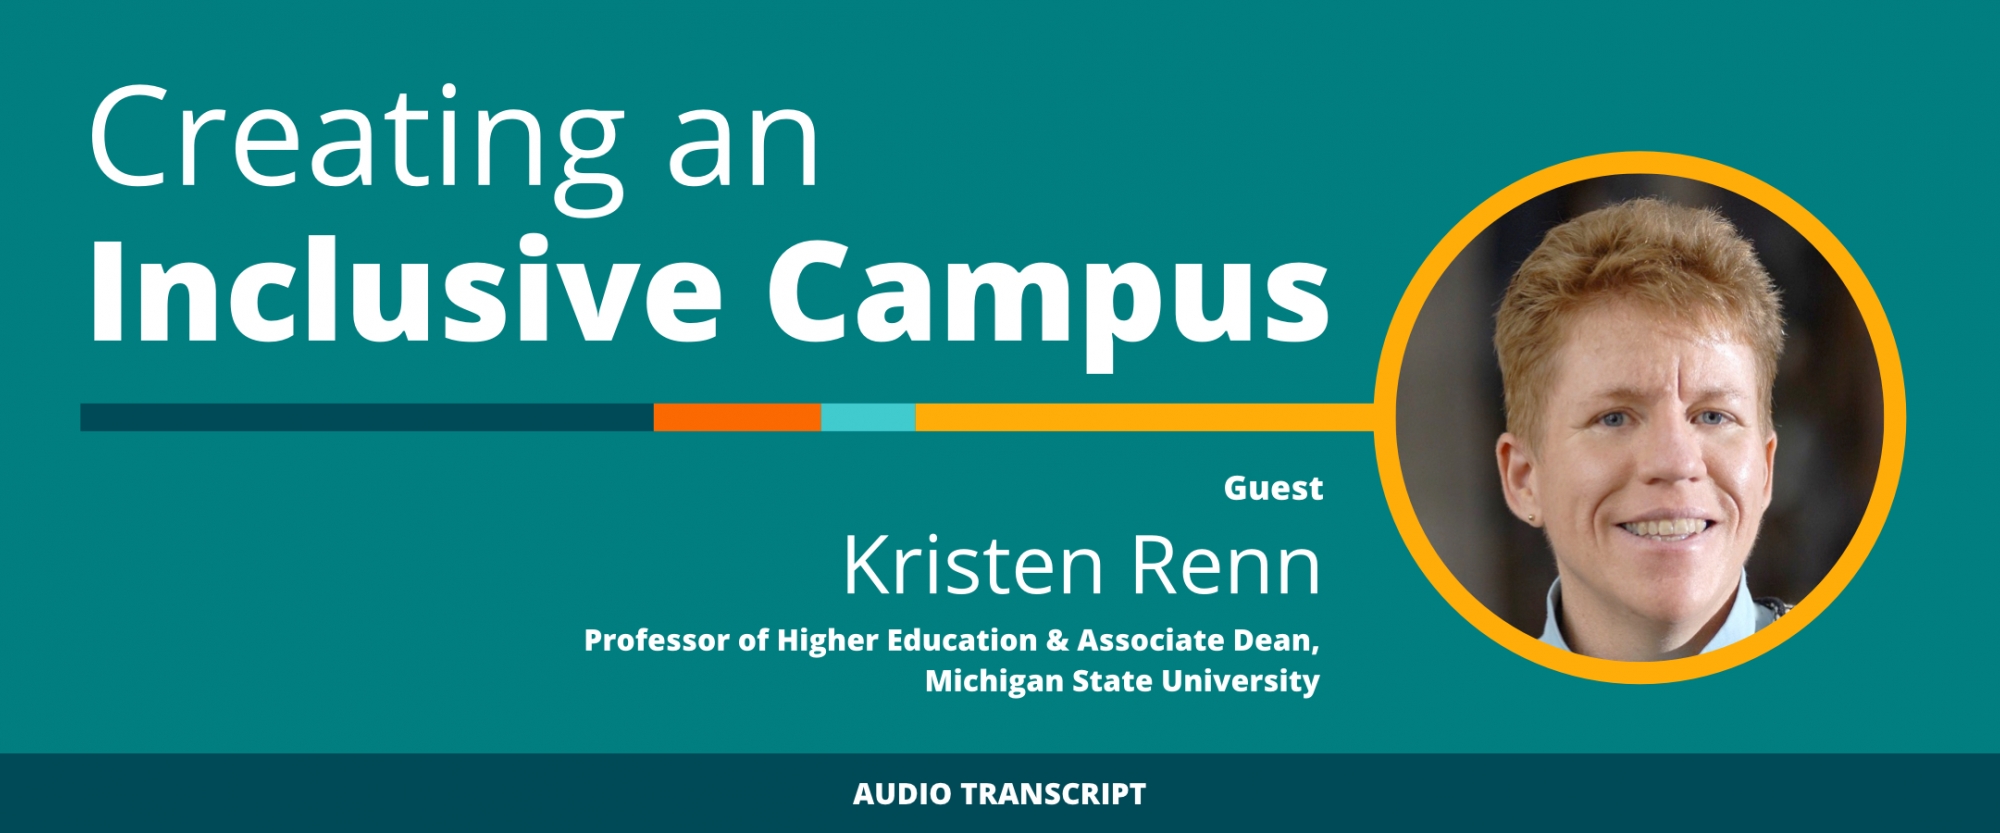 Scholarship to Practice 11/5/20: Transcript of Conversation With Kristen Renn, Professor of Higher Education and Associate Dean, Michigan State University